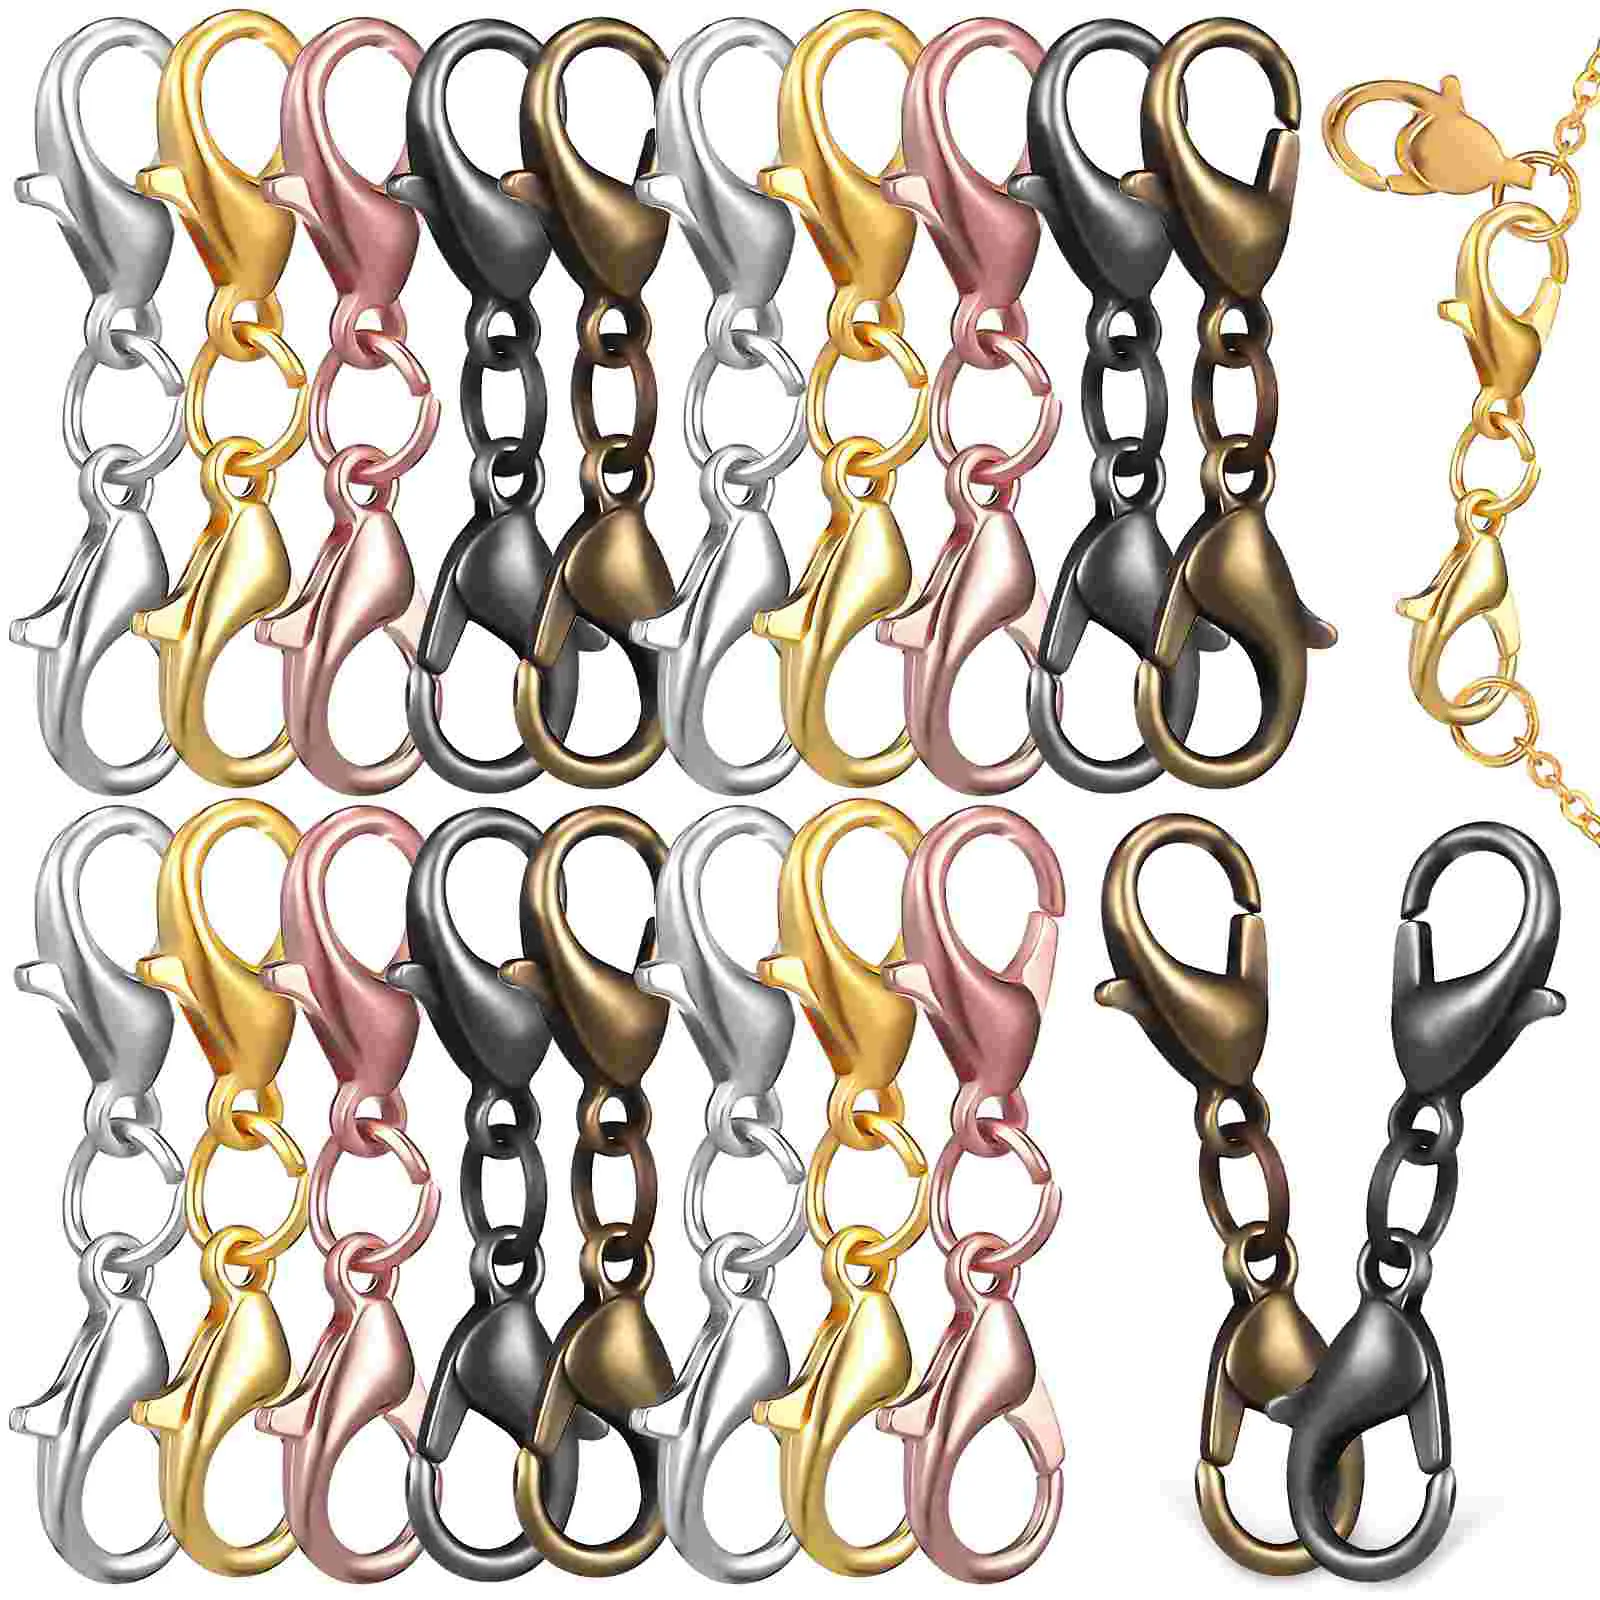 

20 Pcs Key Chain Accessory Bracelet Extender Lobster Claw Clasps Replace Holiday Gifts Jewelry Zinc Alloy for Necklace Double